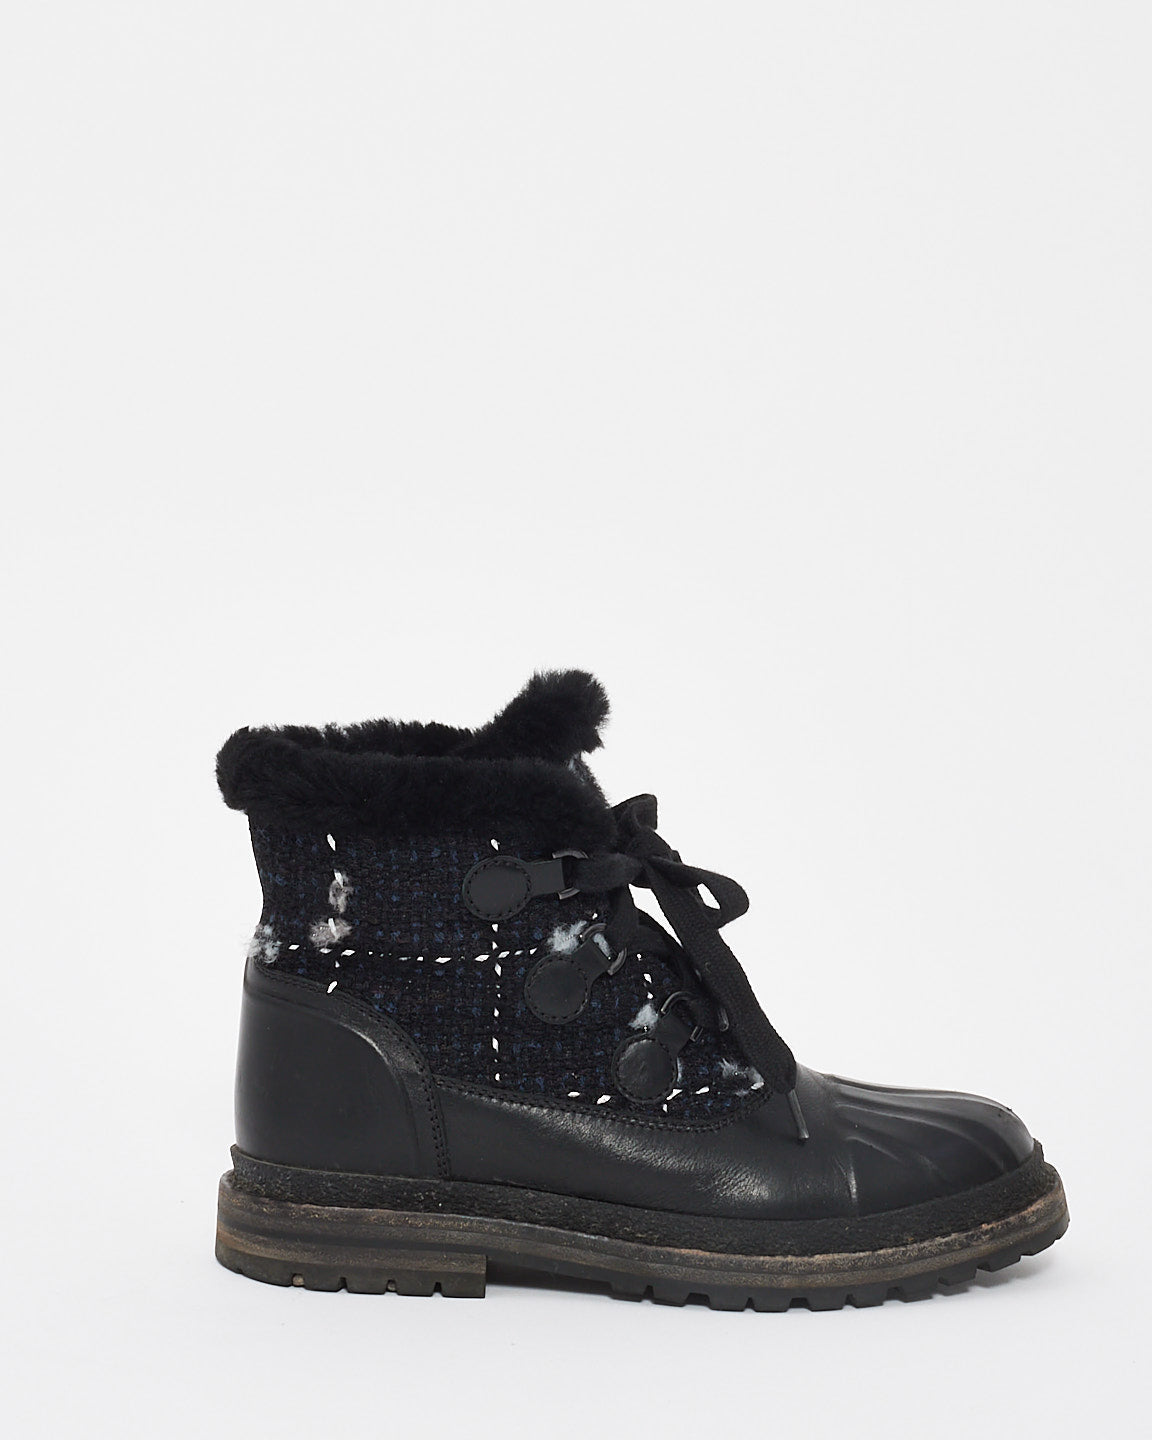 Chanel Black Tweed/Leather Lace Up Ankle Combat Boots - 37